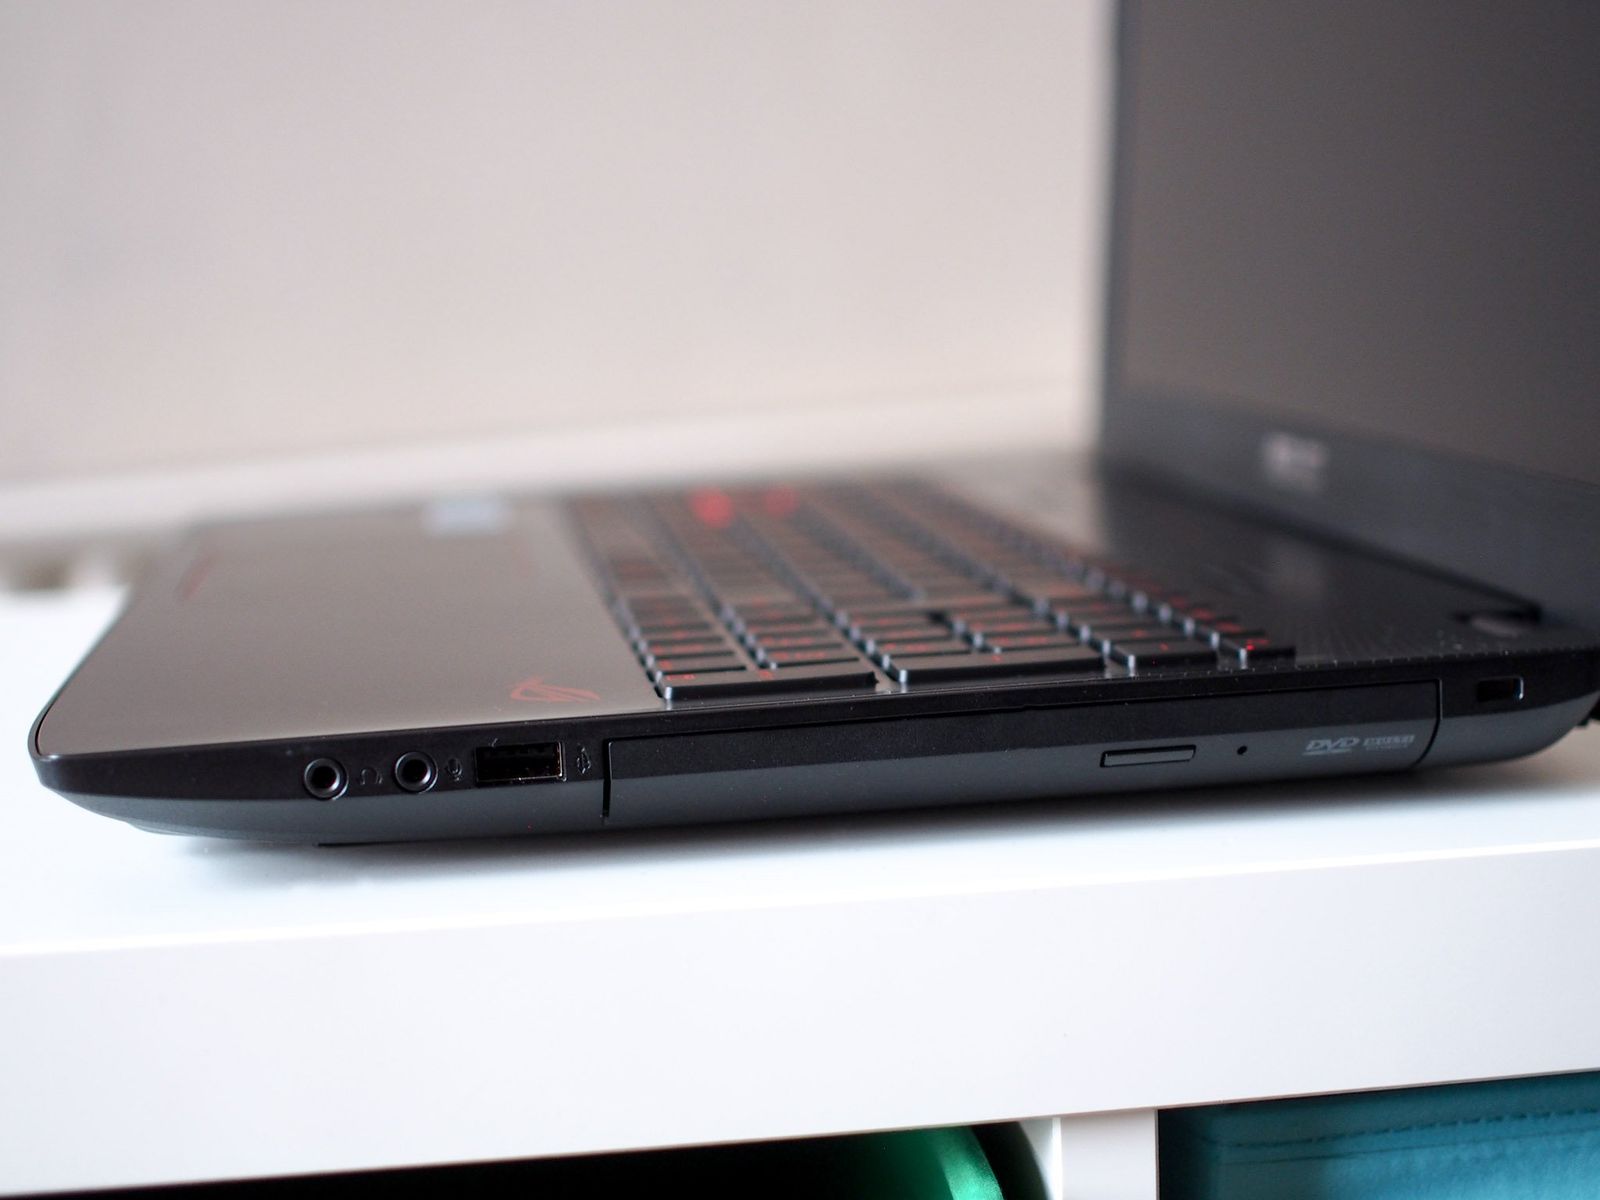 Best laptops with an optical drive